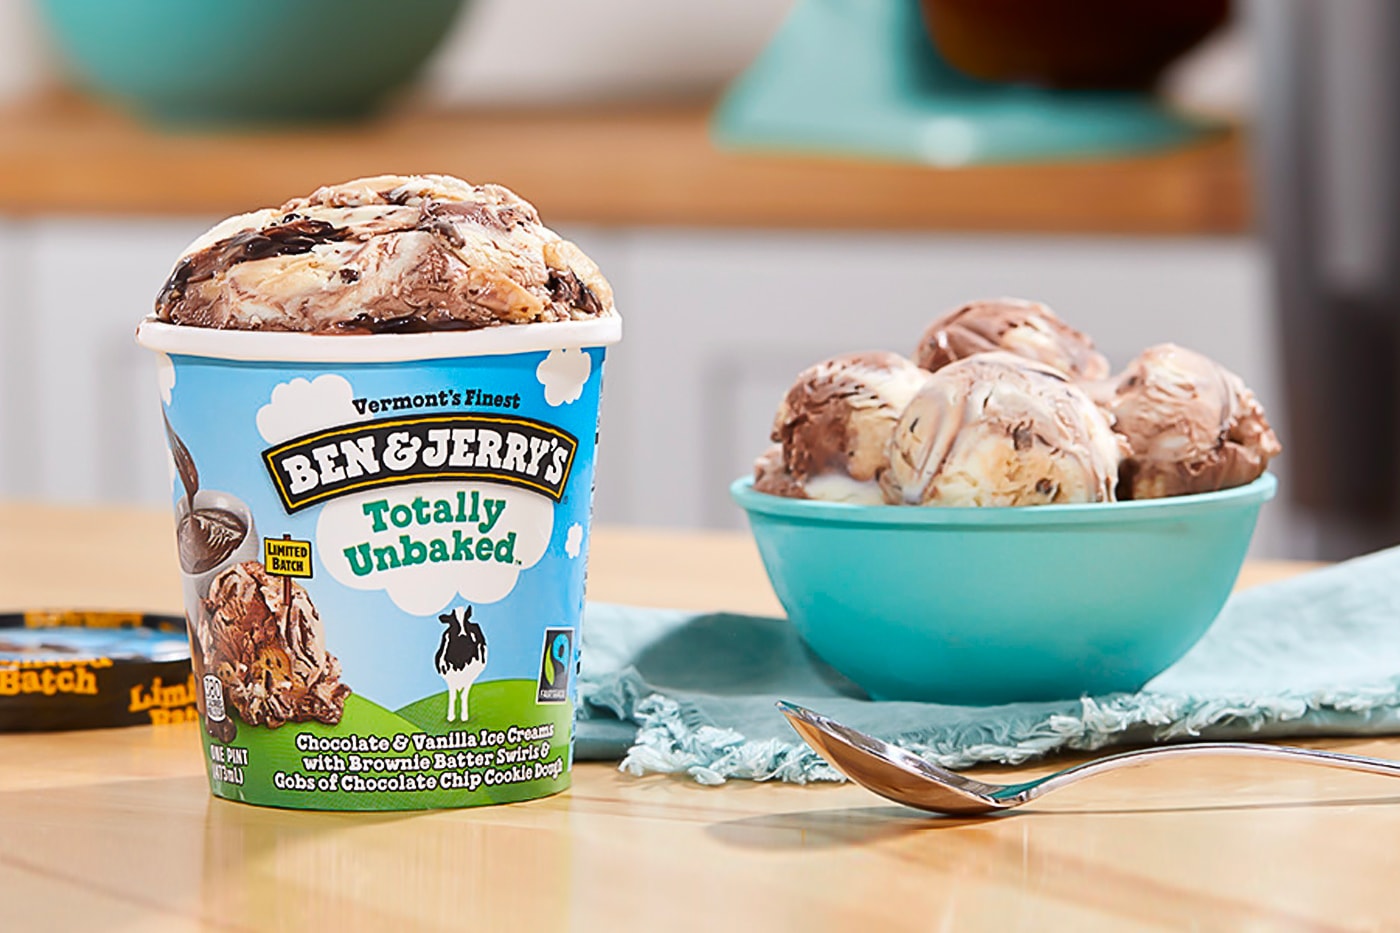 Ben and Jerrys Limited Edition Totally Unbaked ice cream flavor vermont chocolate vanilla brownie batter swirl gobs of chocolate chip cookie dough info